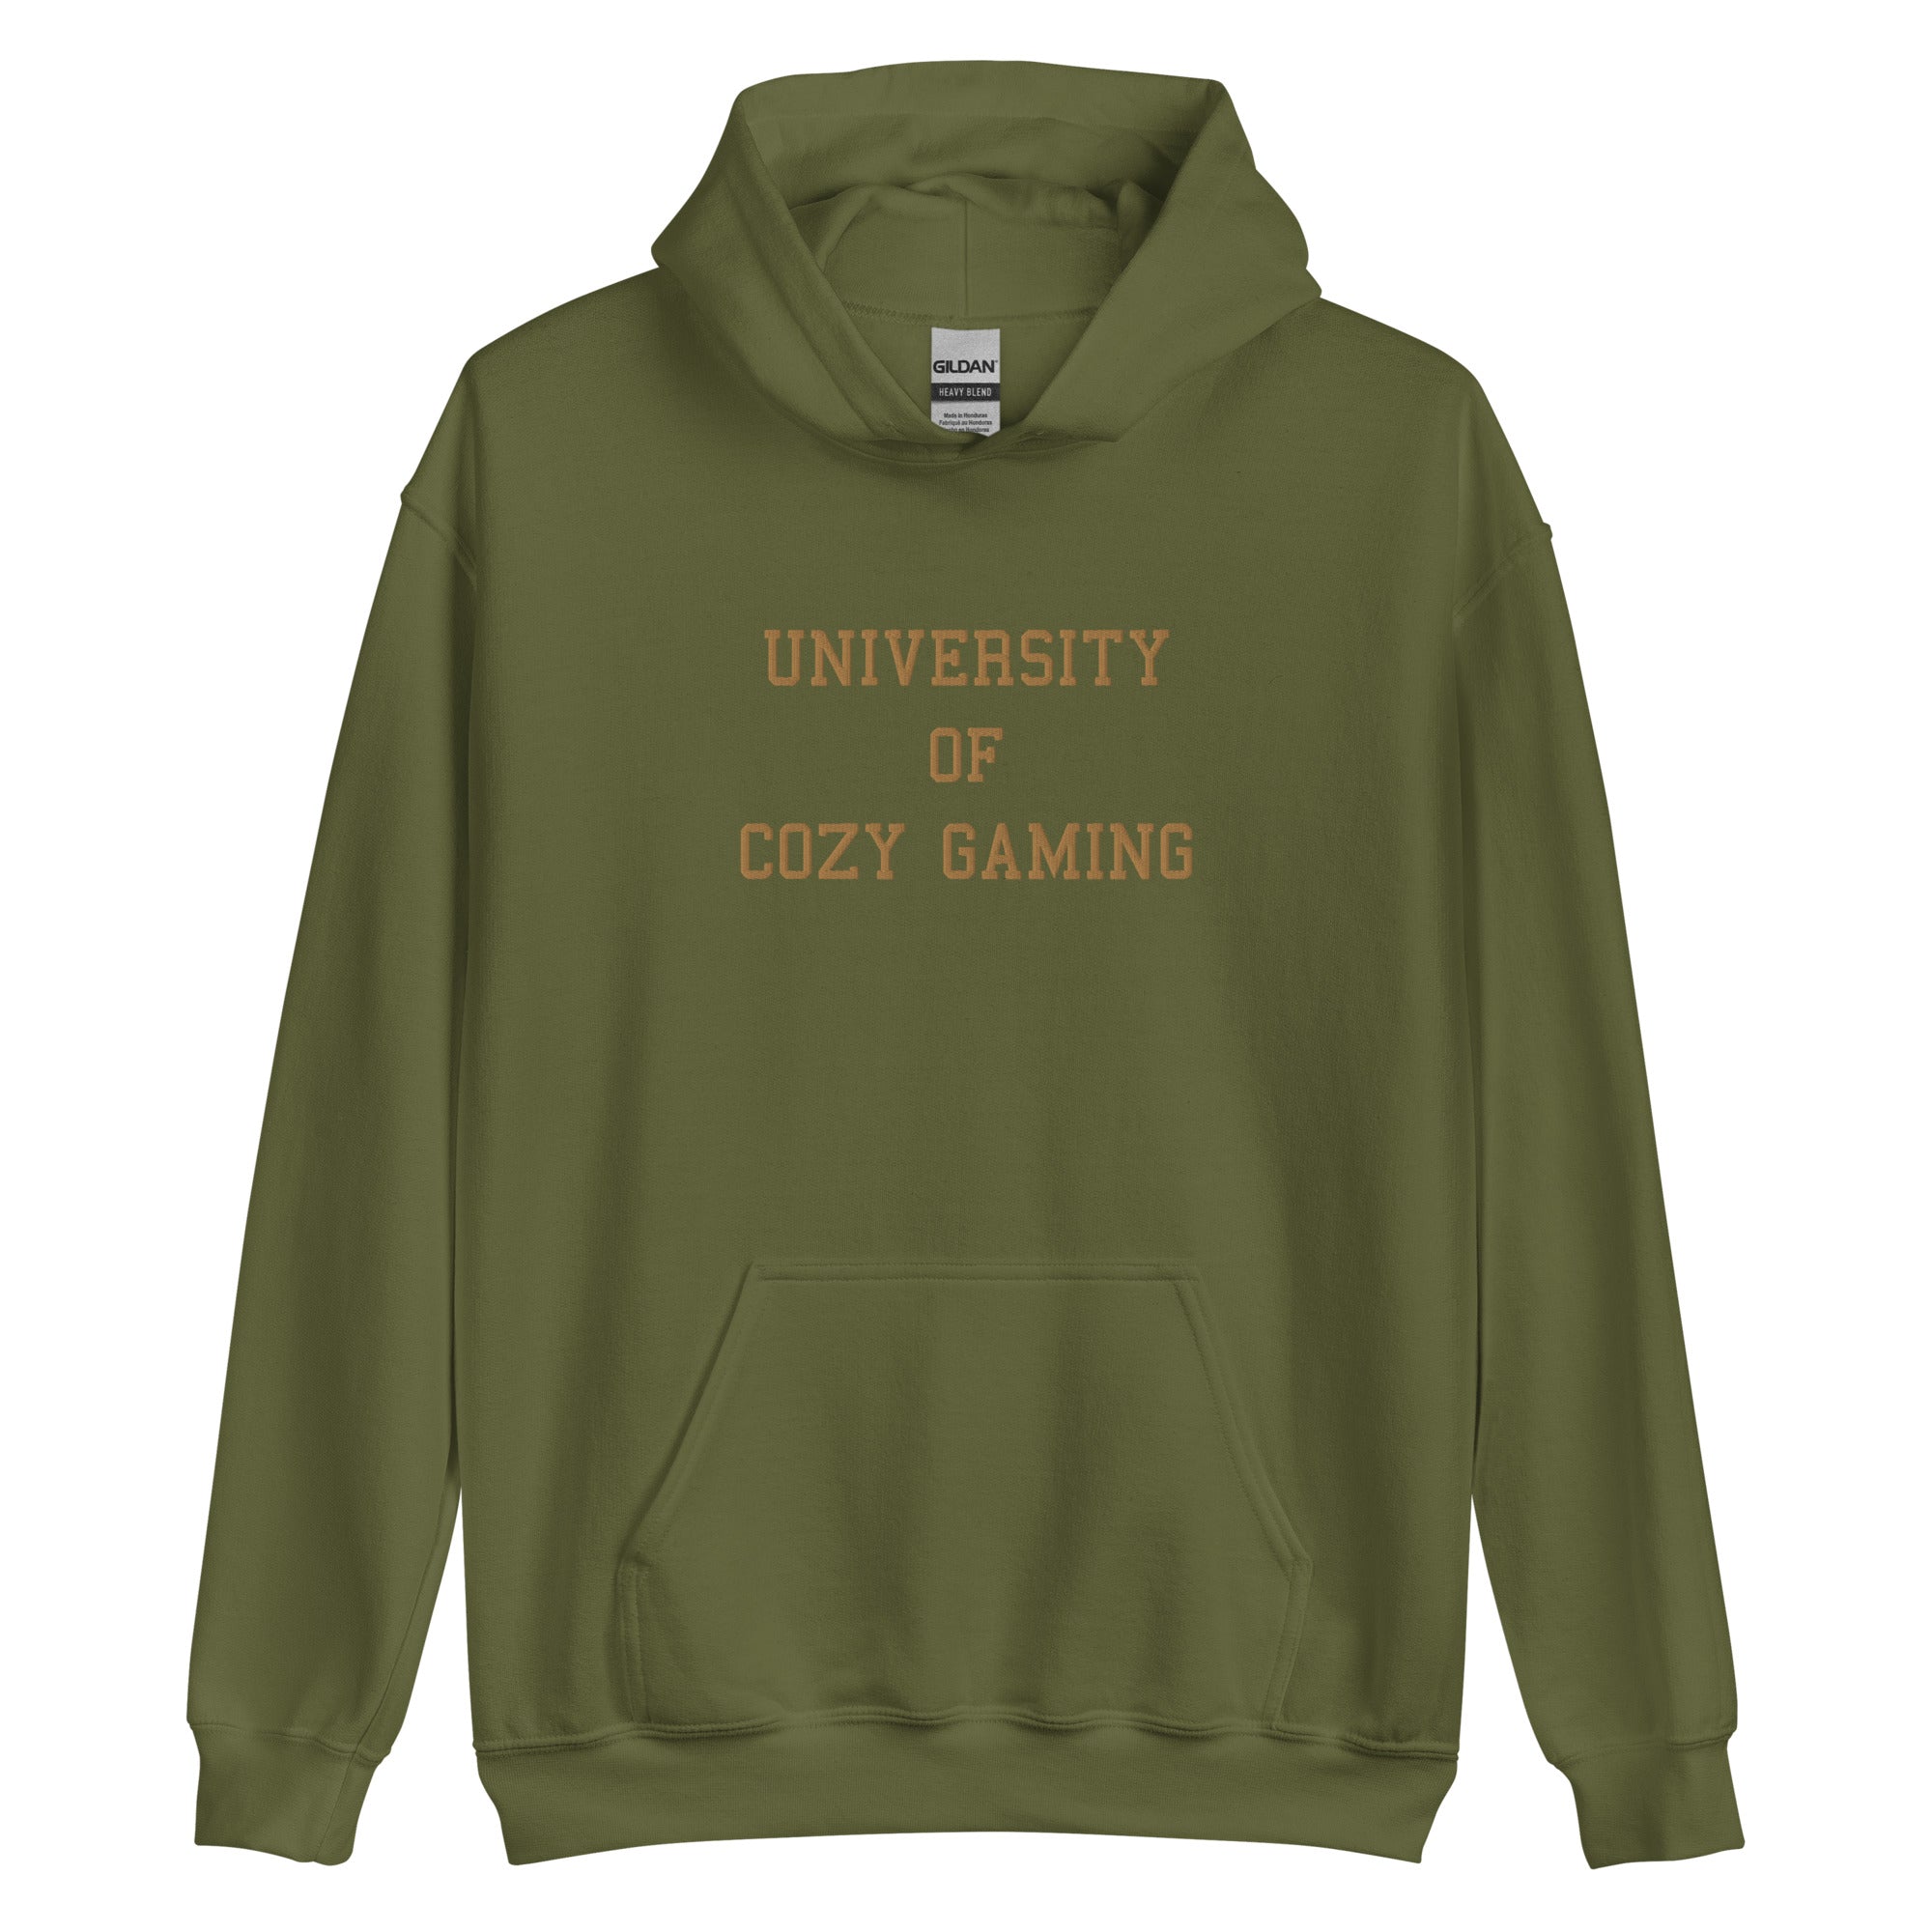 University of Cozy Gaming | Embroidered Unisex Hoodie | Cozy Gamer Threads and Thistles Inventory Military Green S 